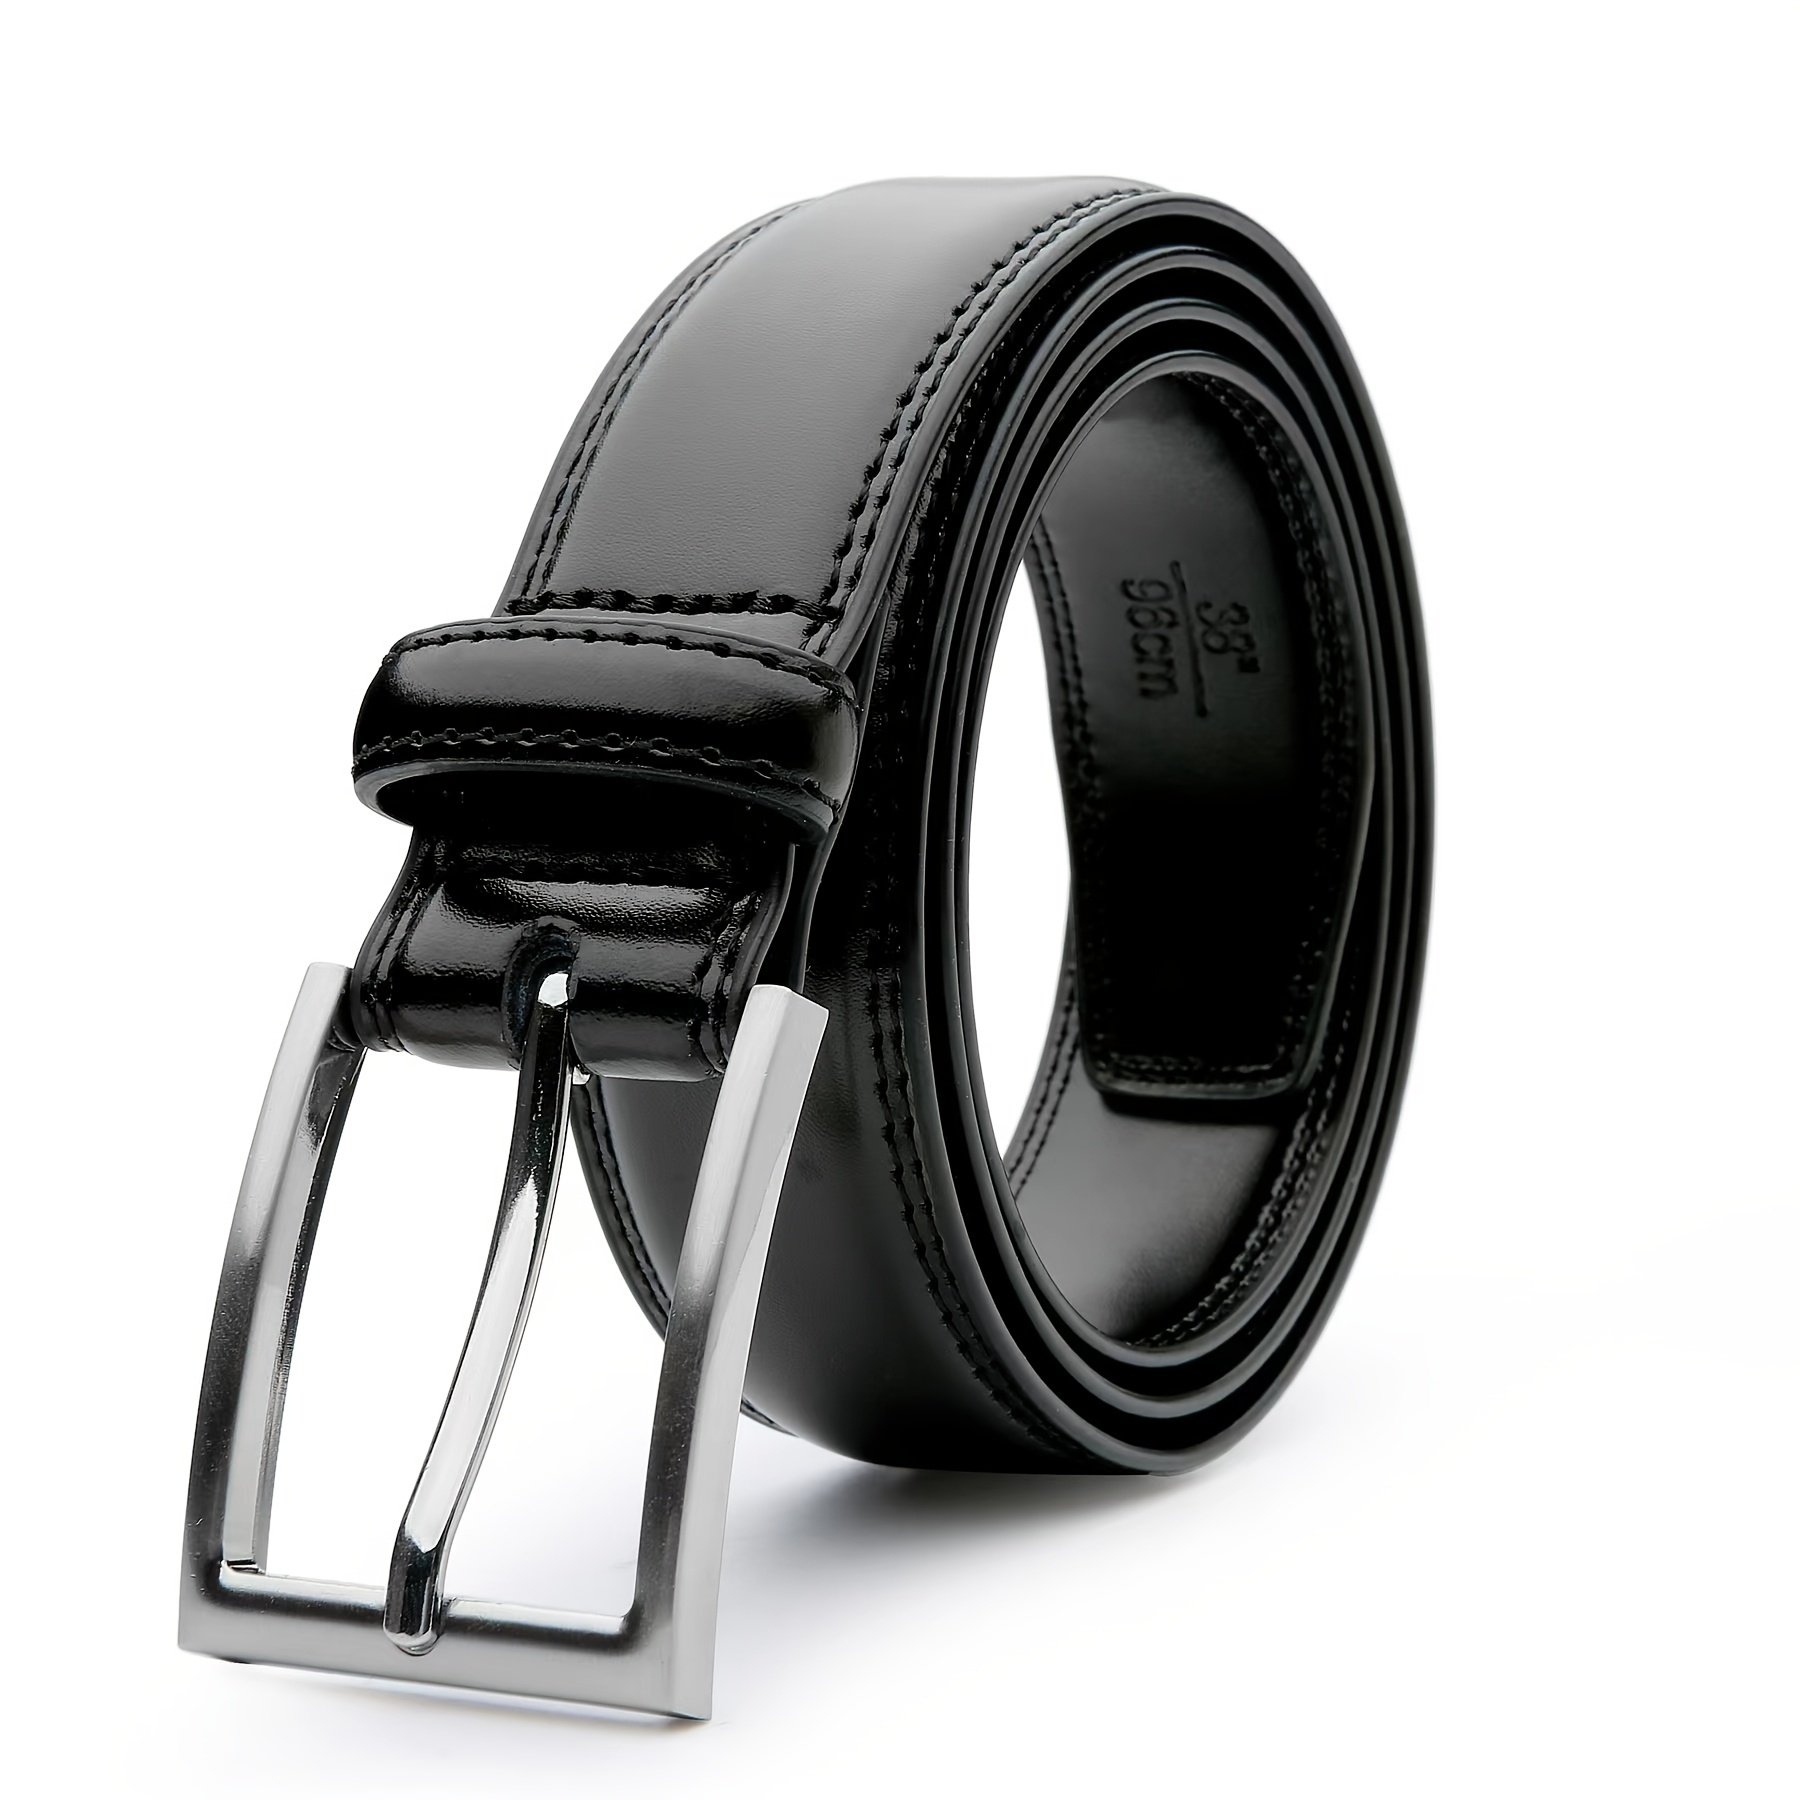 Mens Genuine Leather Belt Fashion Classic Casual Belt With Single Prong  Buckle For Jeans Pants Work And Business Gift For Dad Husband - Jewelry & 